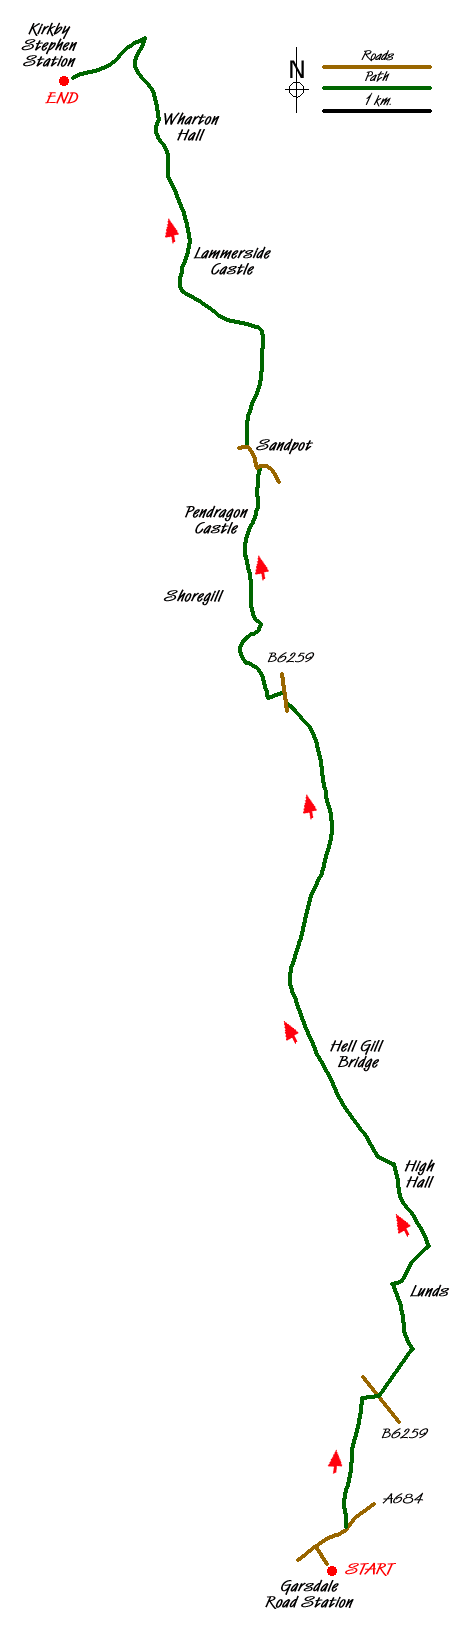 Route Map - The Upper Eden valley without a car Walk